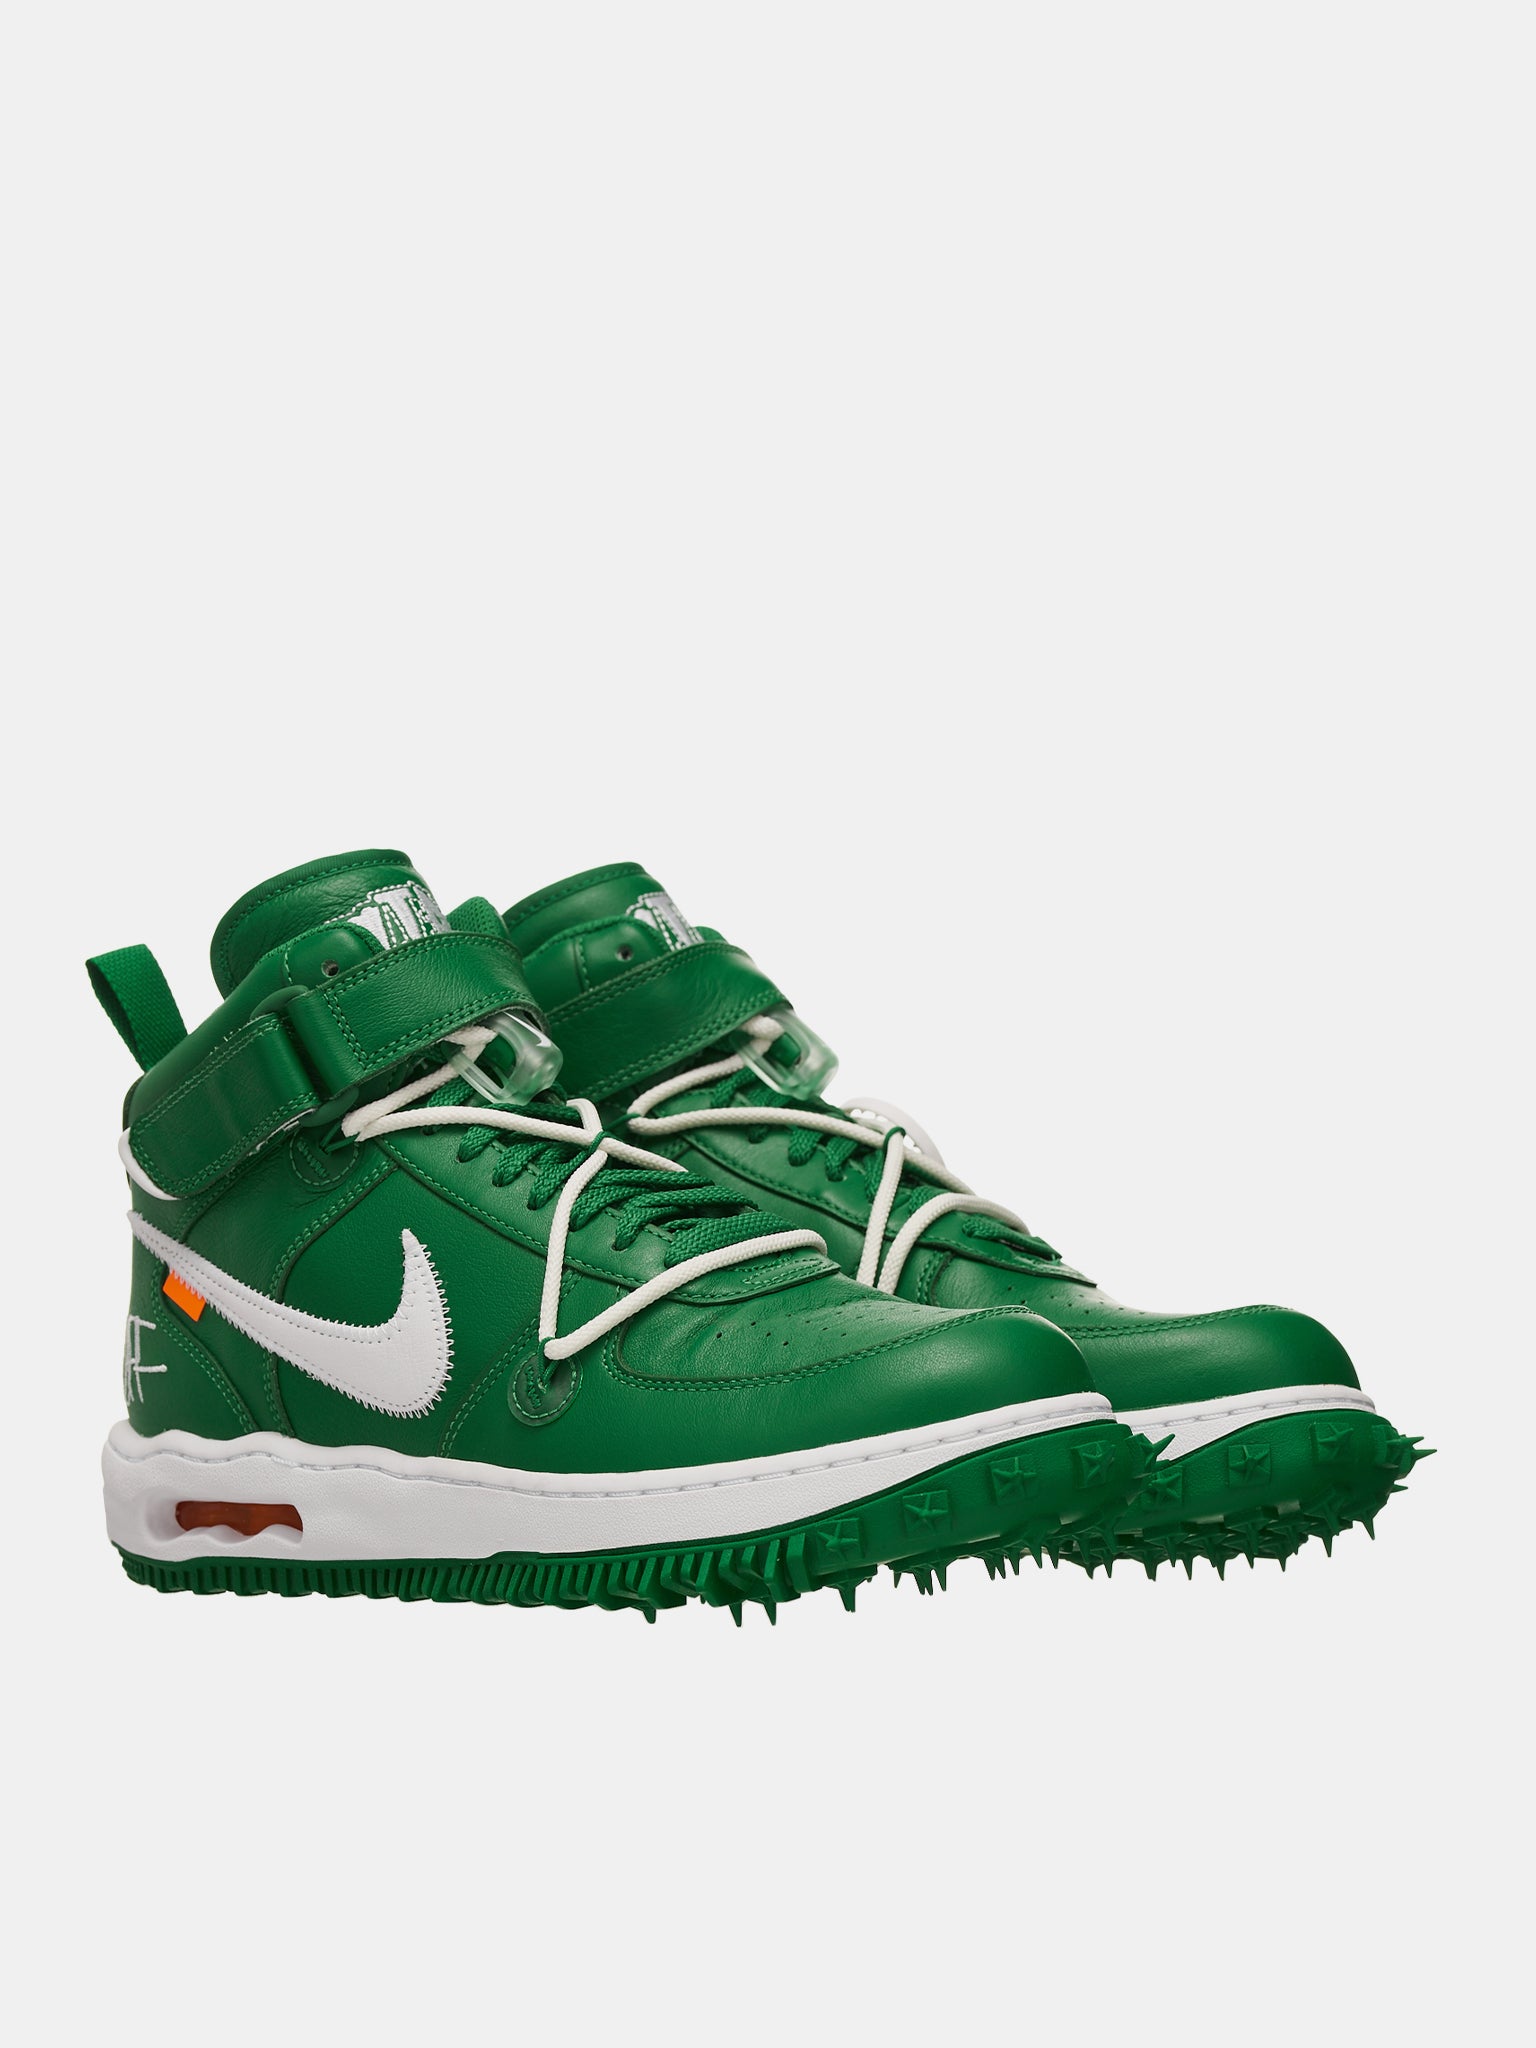 Off-White x Nike Air Force 1 Mid Sneakers - Green Sneakers, Shoes